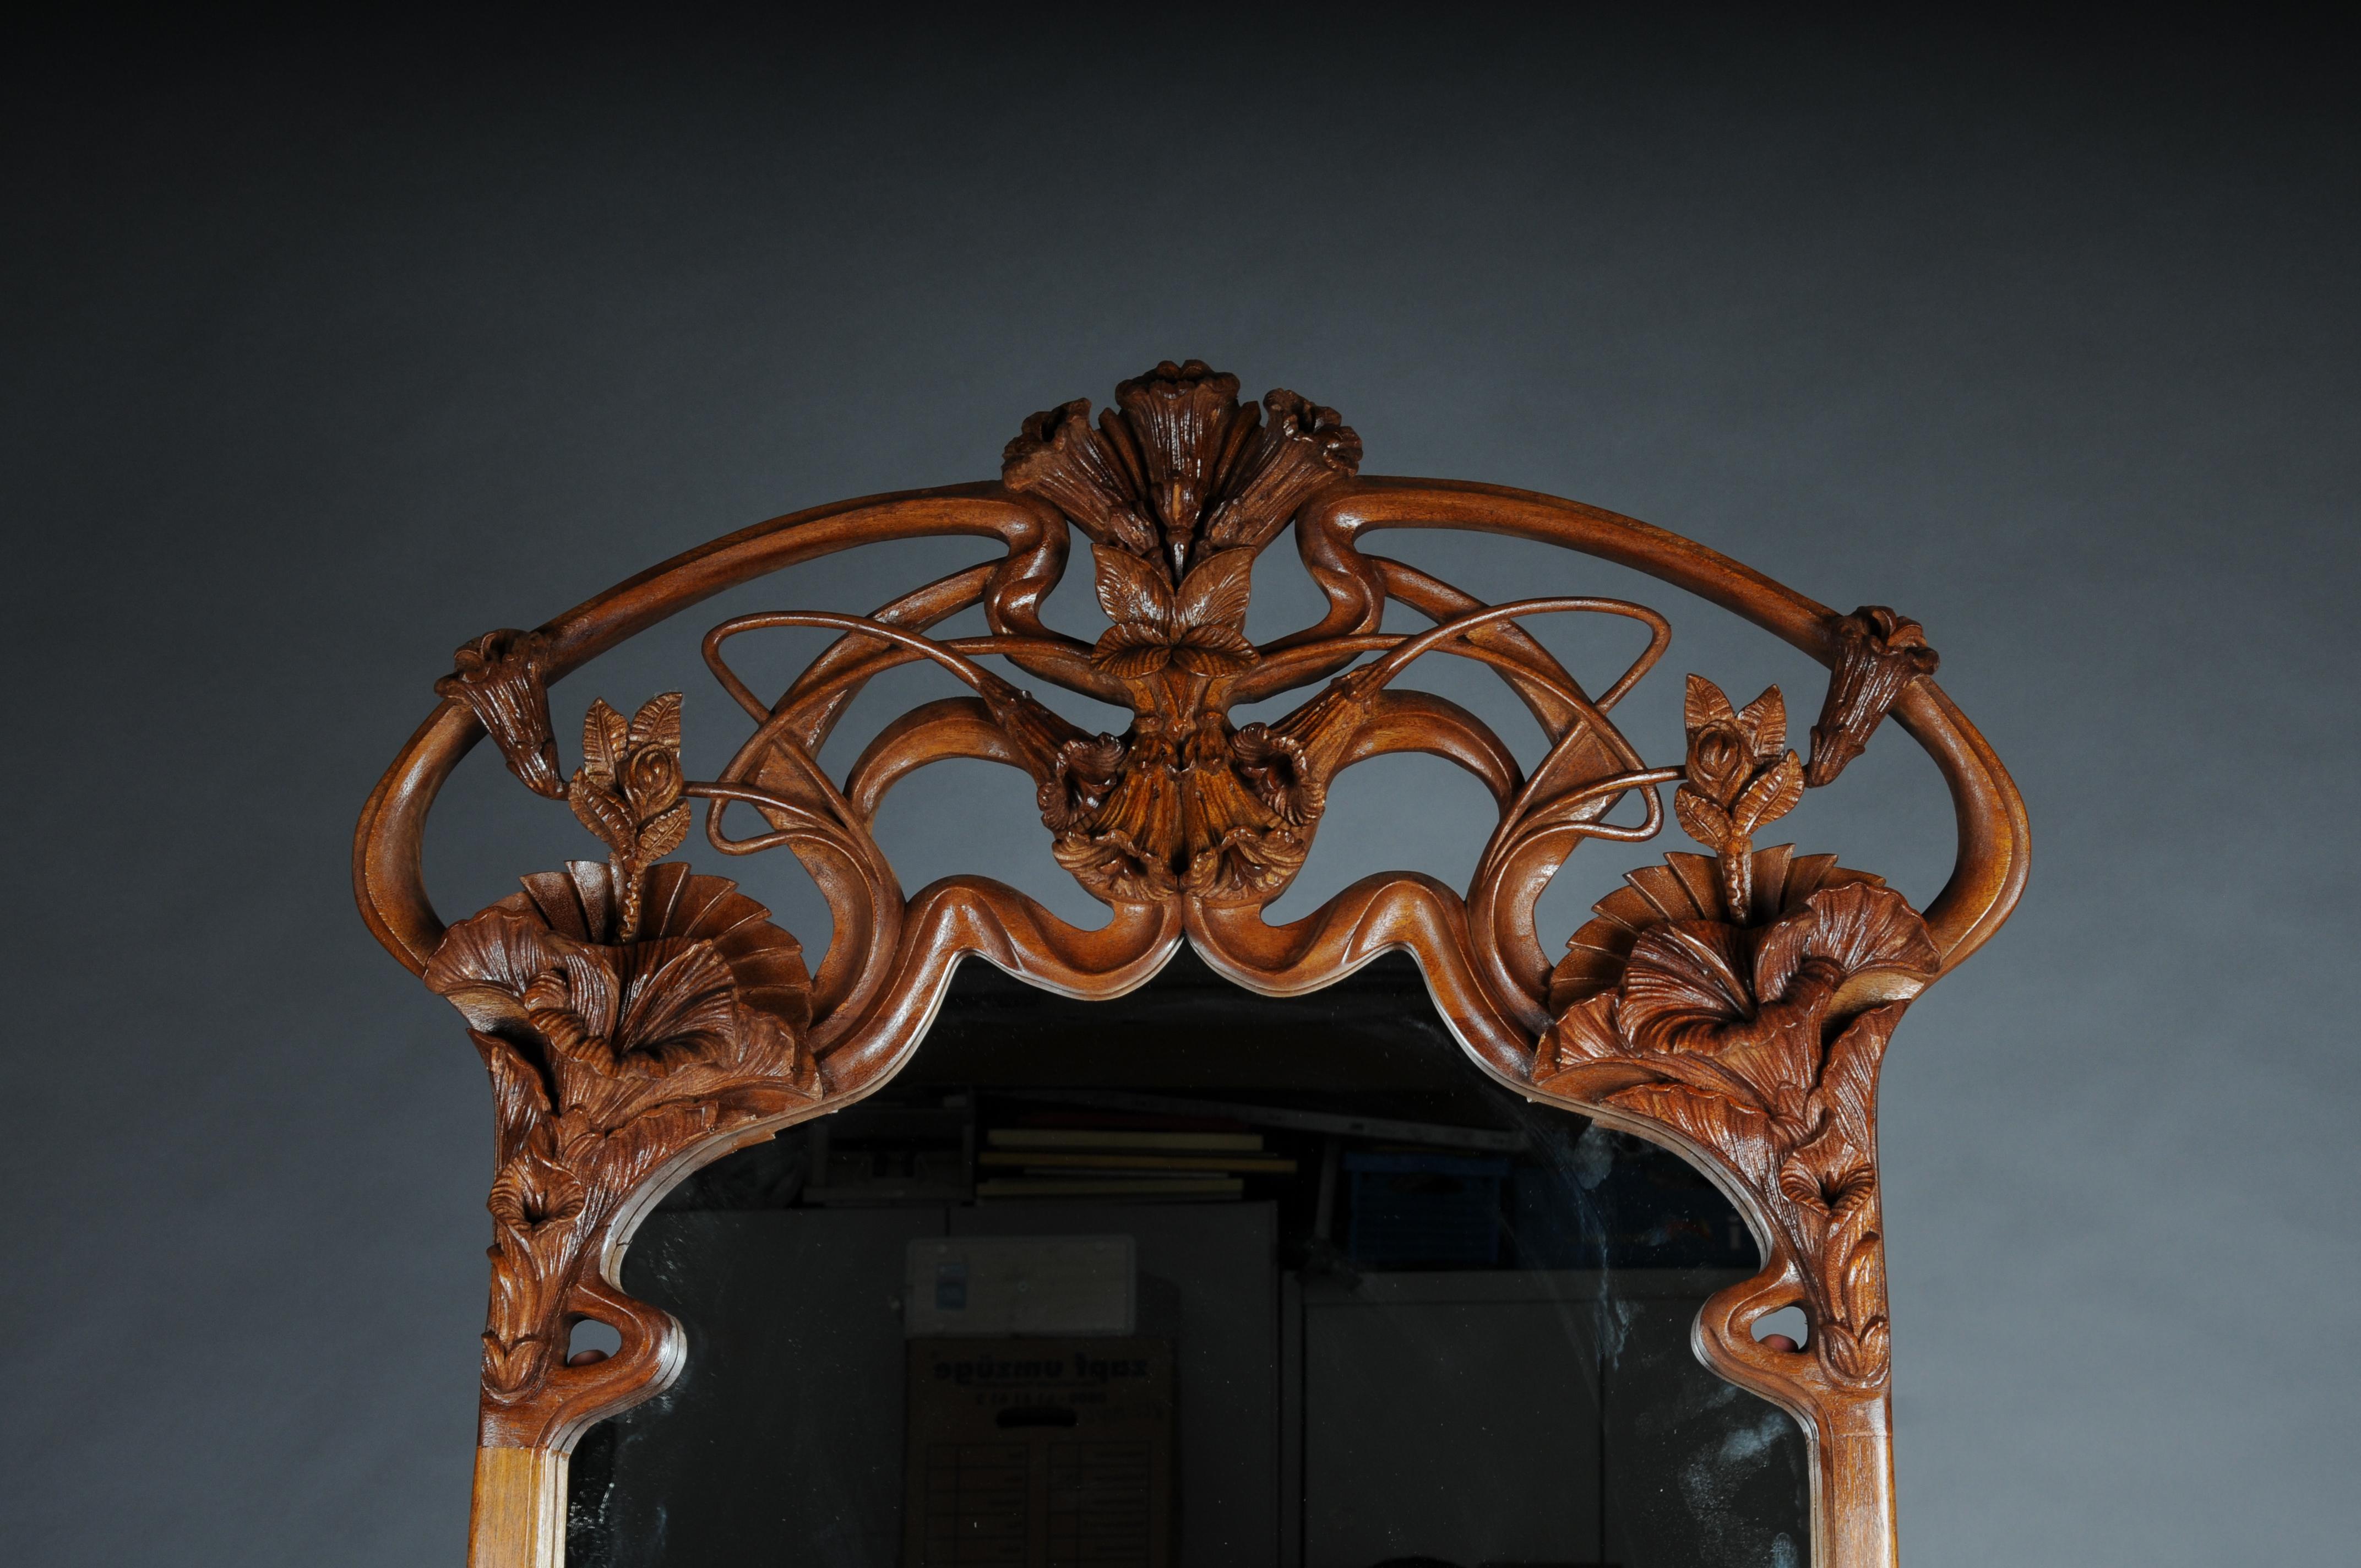 20th Century Royal French Art Noveau Wall Mirror

Solid wood, finely carved and dark stained.
Branch-shaped frame. Mirror crowned with floral foliage. Very ornate and ornate.

Very decorative and elegant. A real eye-catcher in every home.